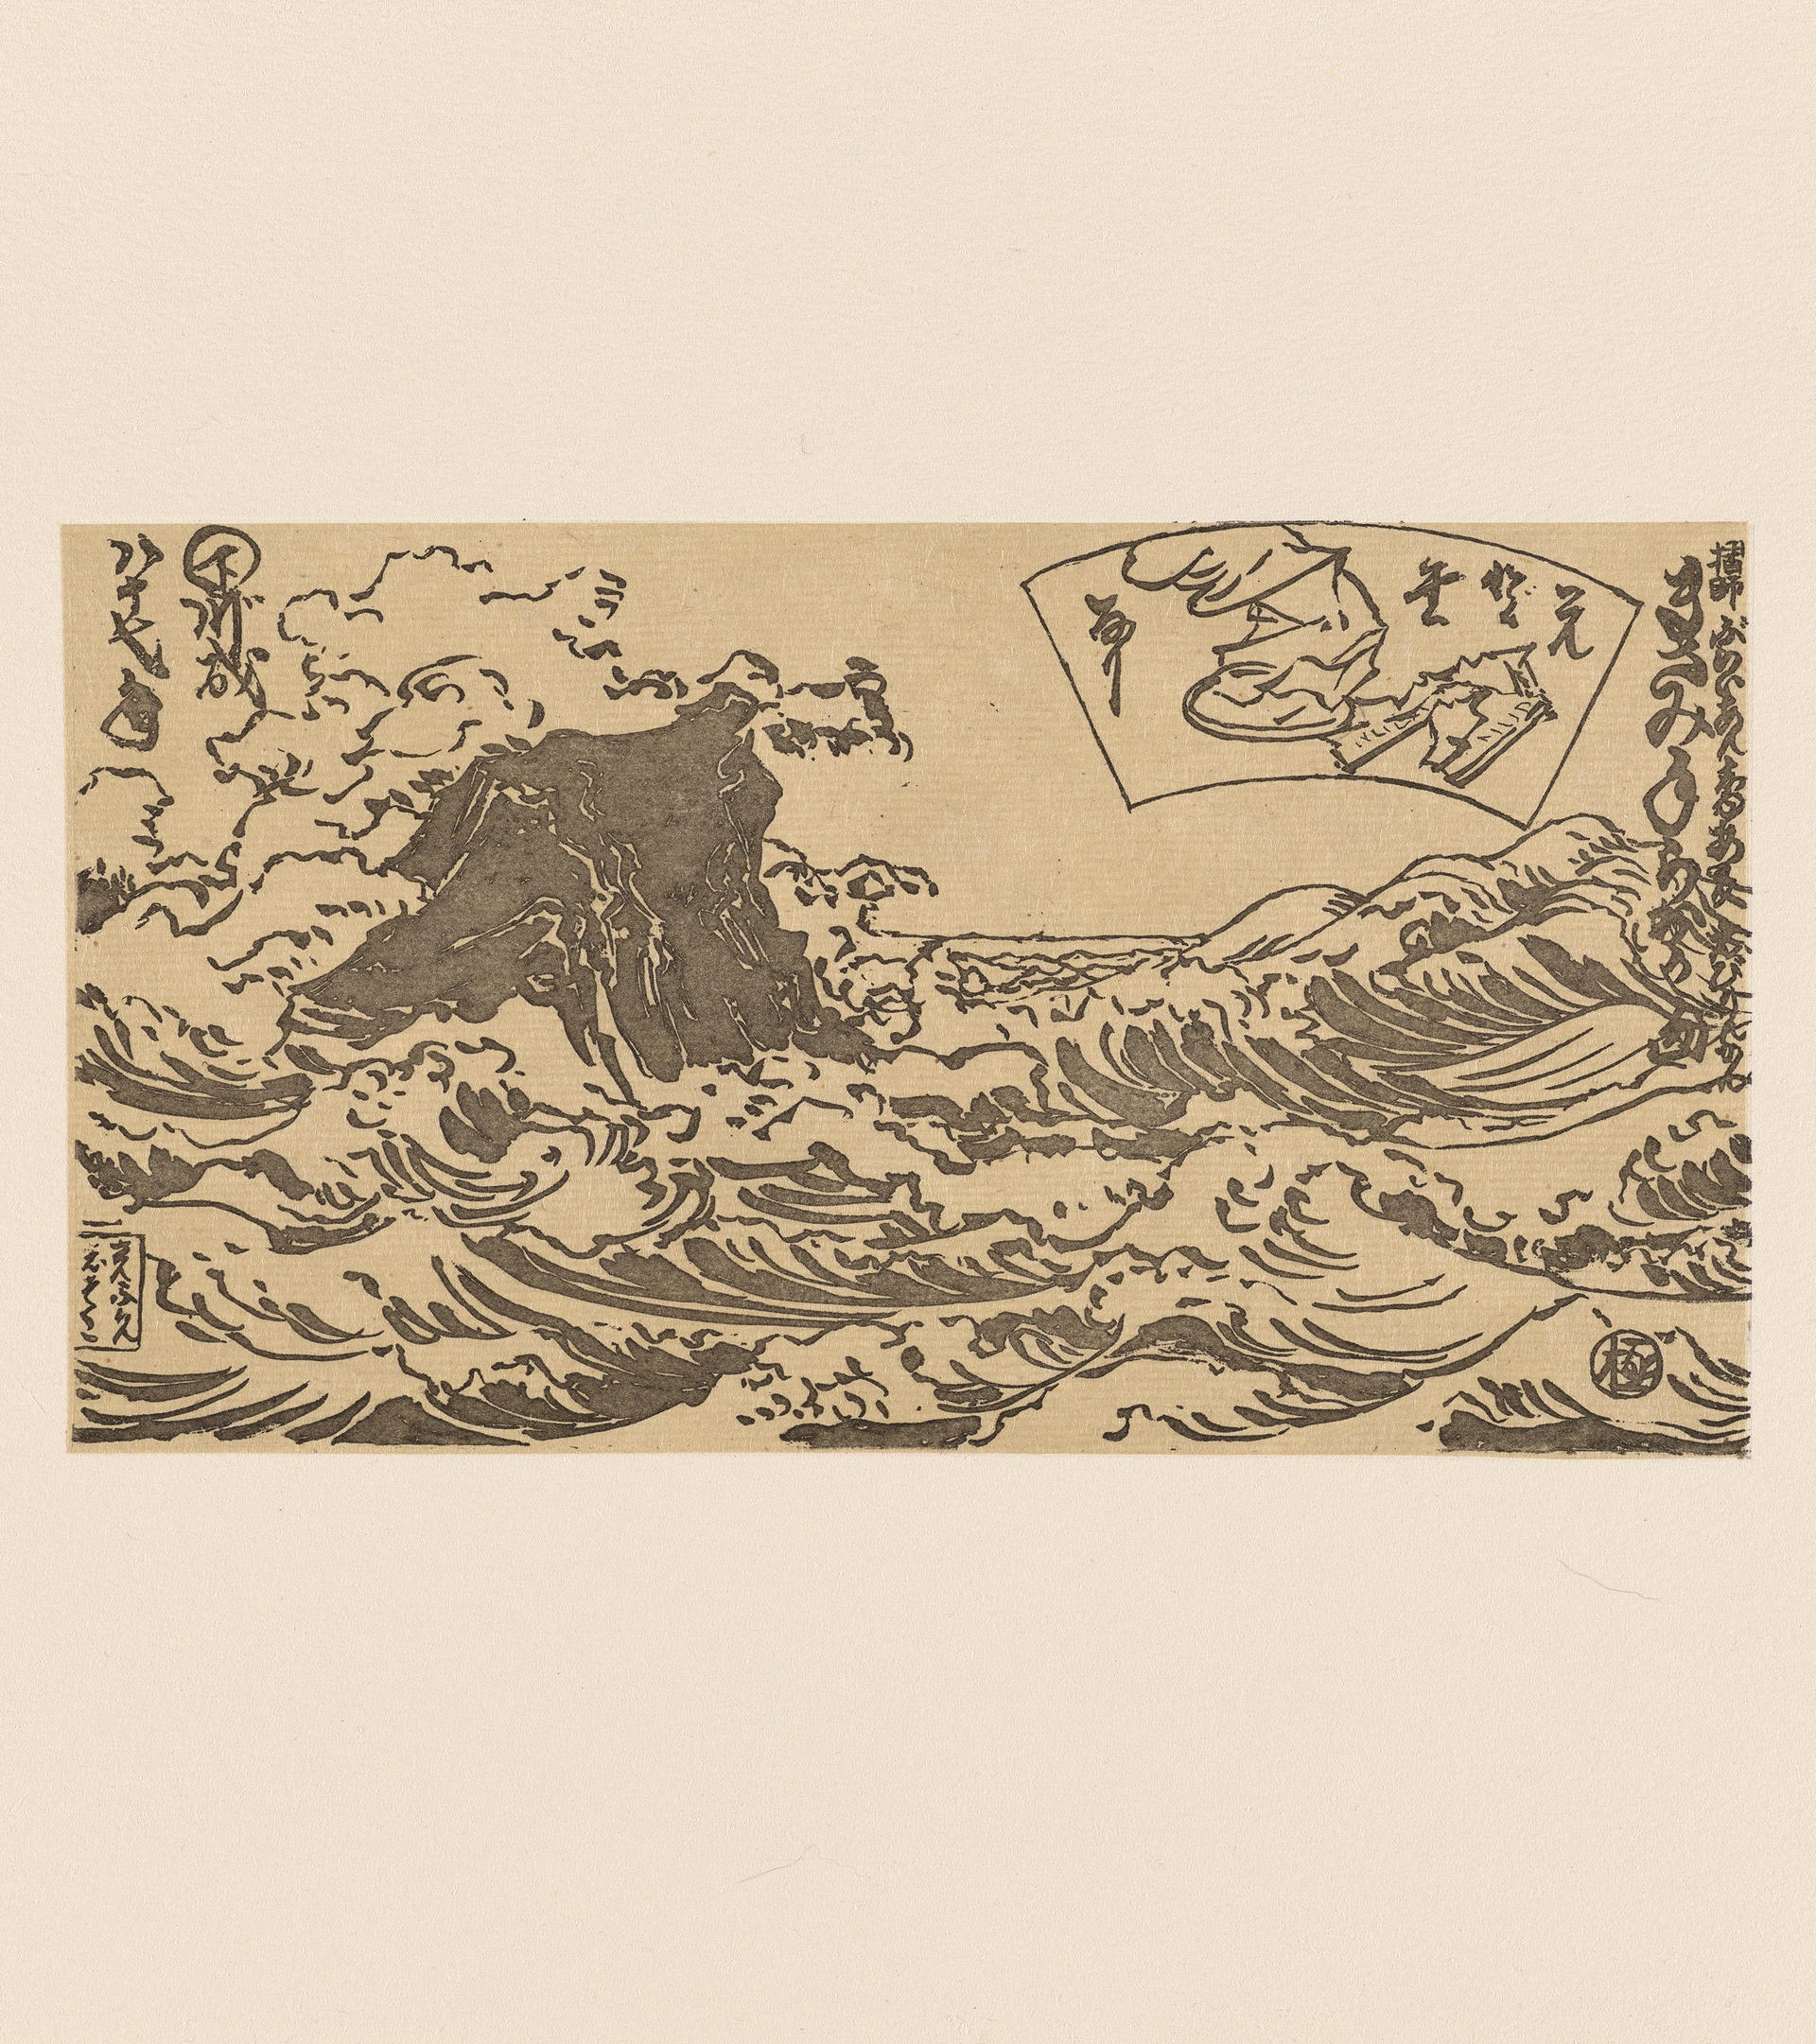 A woodblock print depicting rough seas and a tall wave. On the top right is a fanned depiction of a torn condom. Japanese scripture flanks either side. 